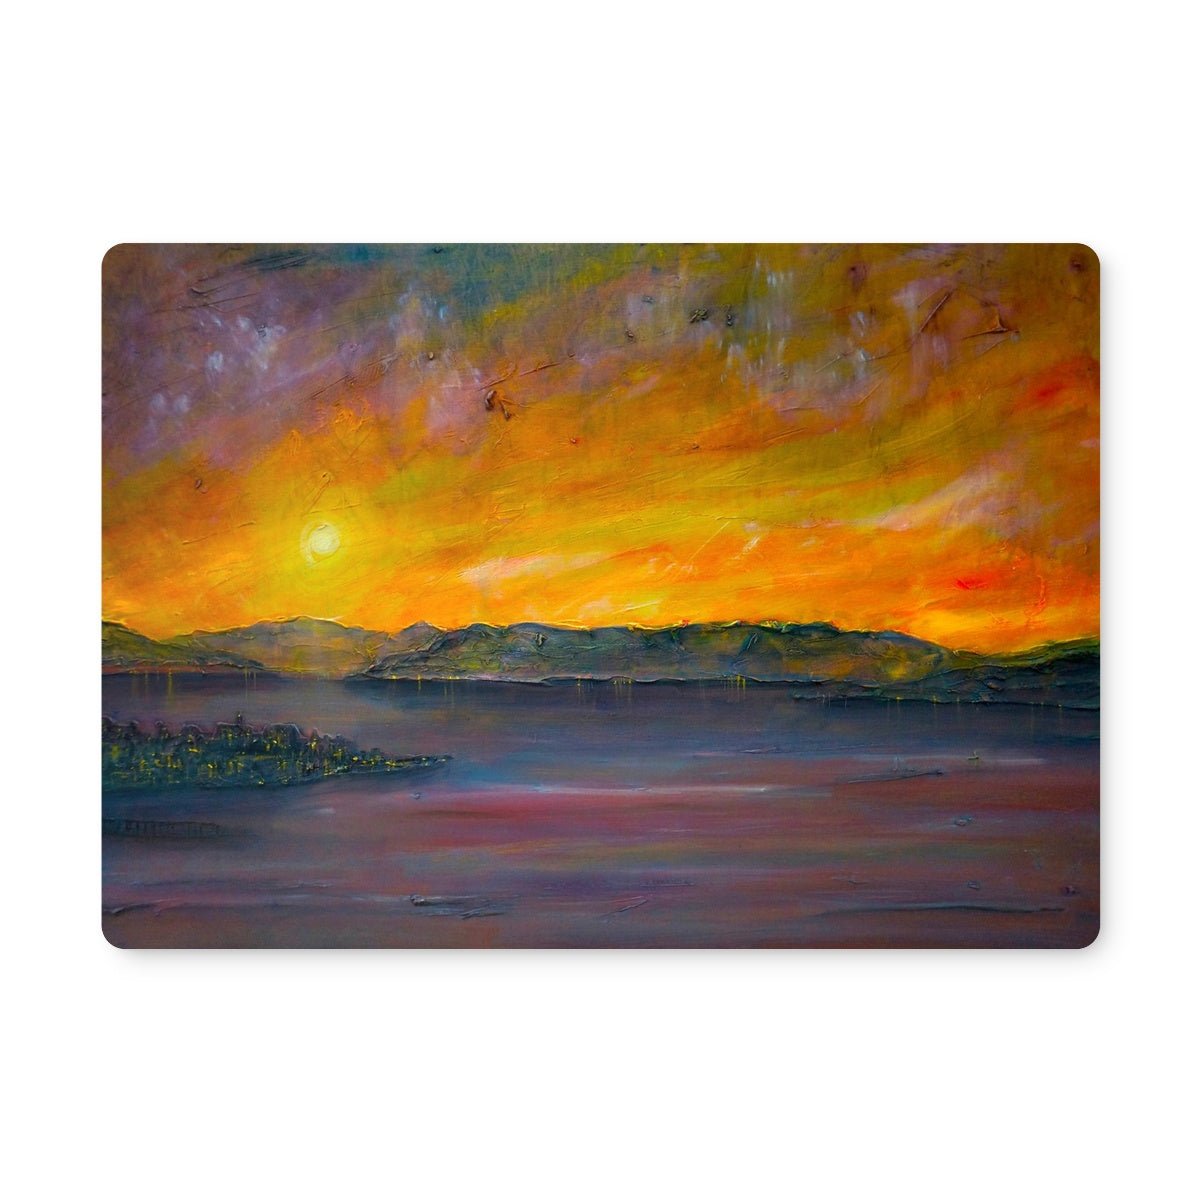 Sunset Over Gourock Art Gifts Placemat-Placemats-River Clyde Art Gallery-2 Placemats-Paintings, Prints, Homeware, Art Gifts From Scotland By Scottish Artist Kevin Hunter